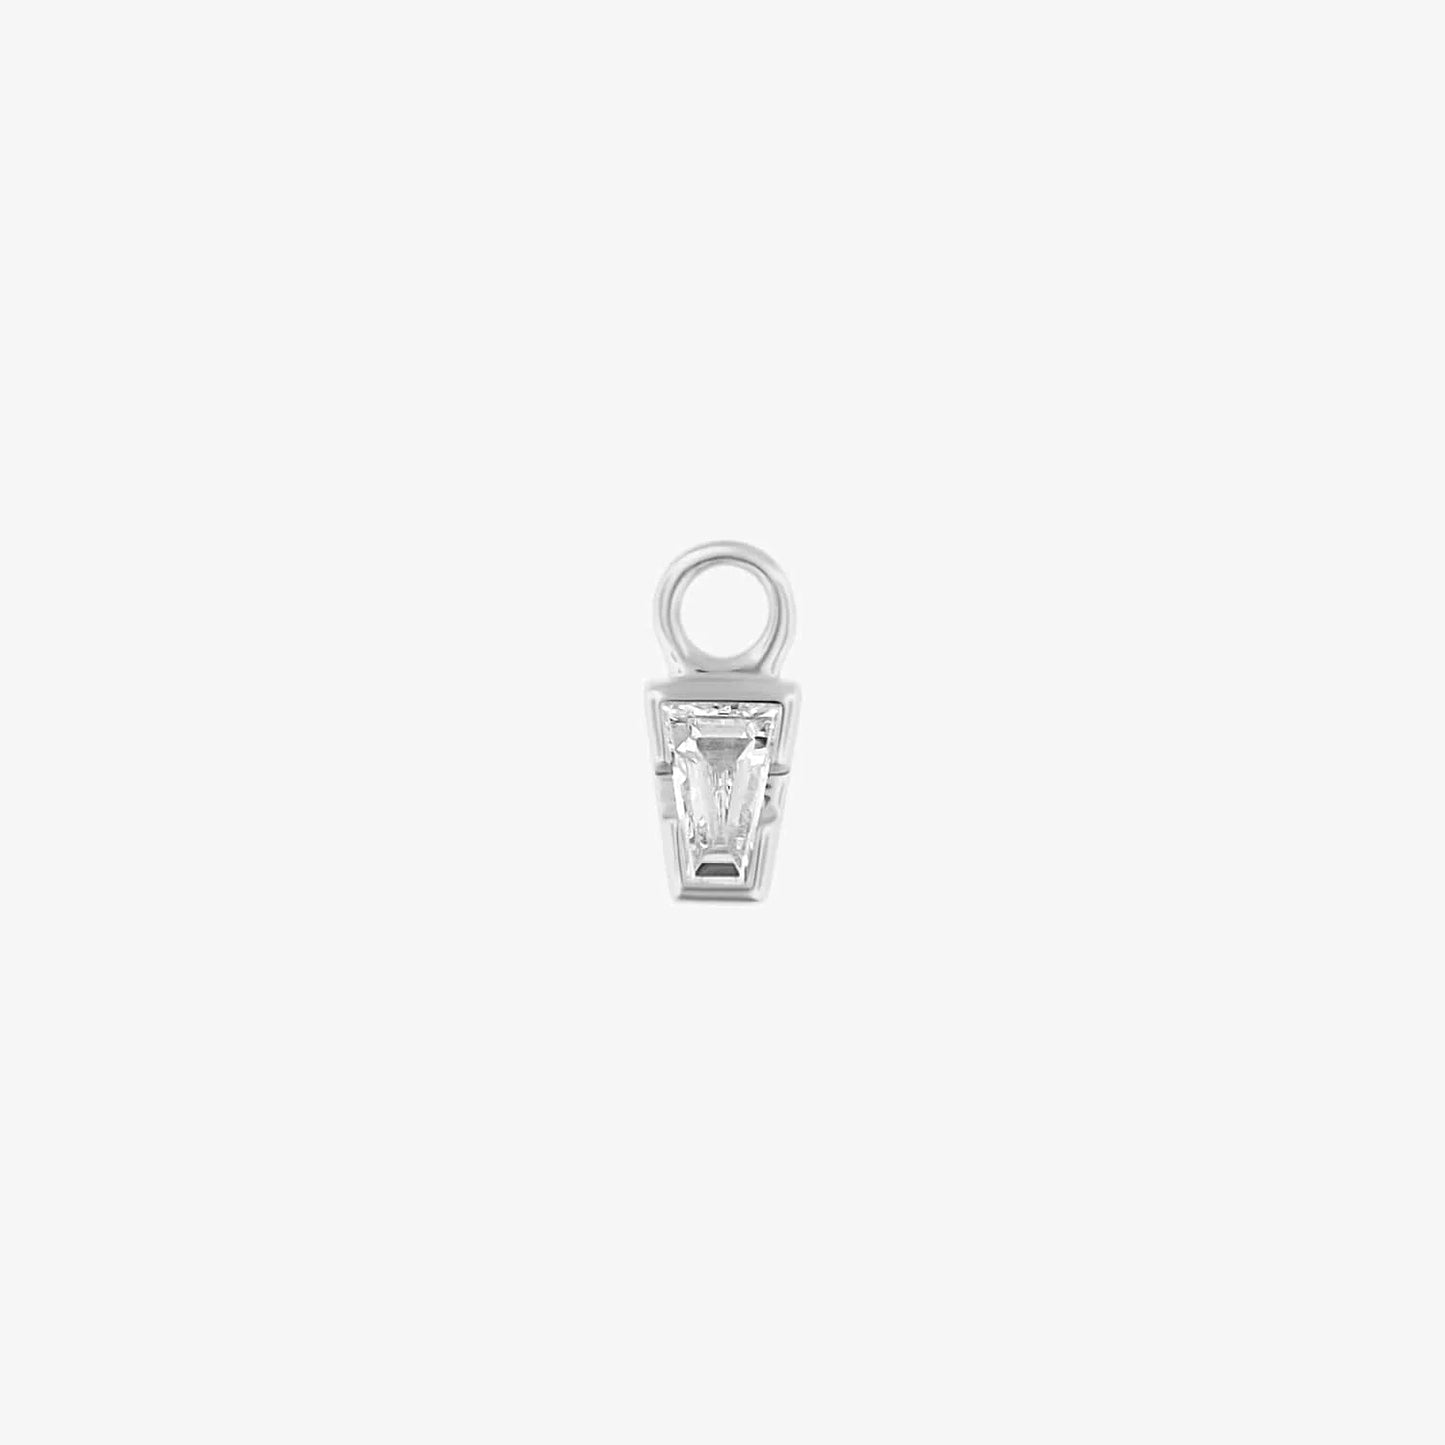 TETHER - LINDA TAPERED BAGUETTE - DIAMOND -14KT SOLID GOLD - CHARM